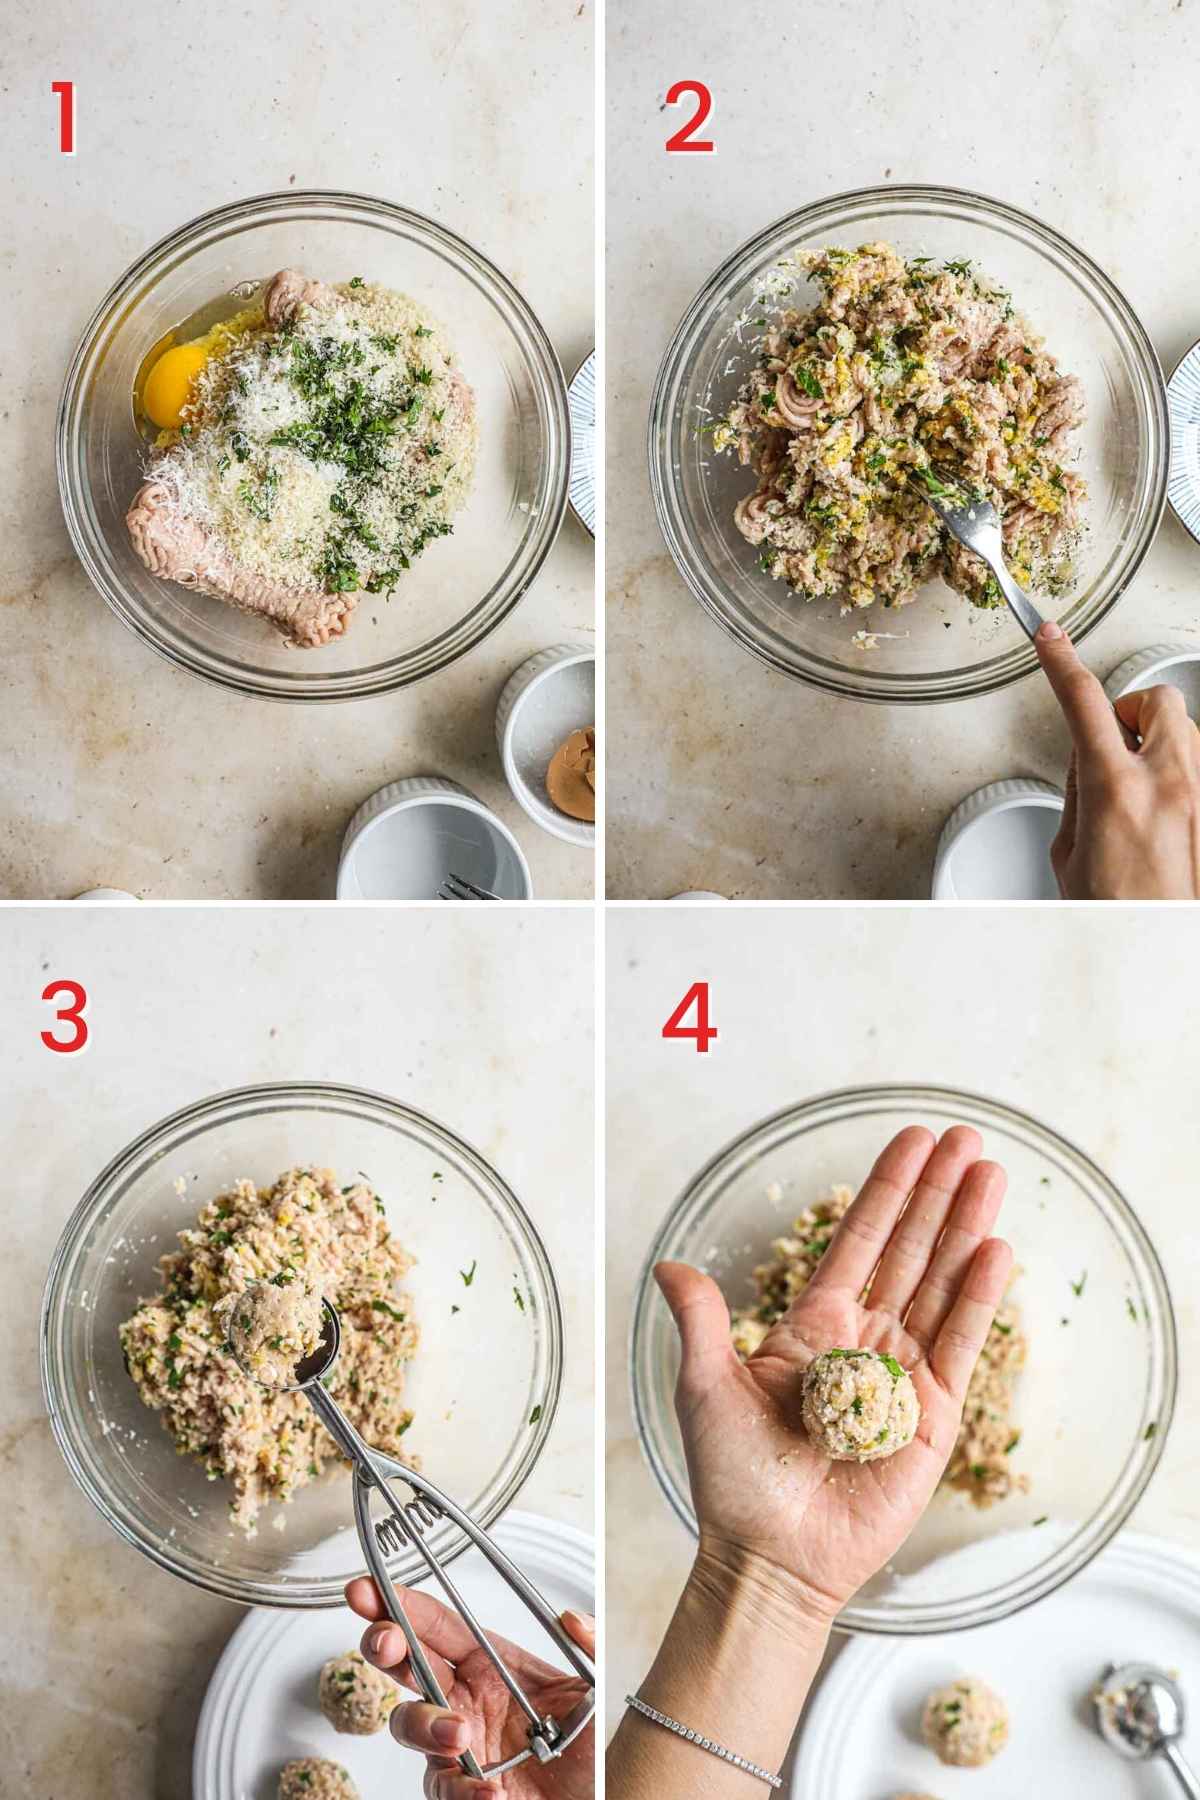 Steps to make healthy Italian chicken meatballs, including mixing the ground chicken with herbs, eggs, and panko; scooping the ground chicken and rolling the meat into meatballs.